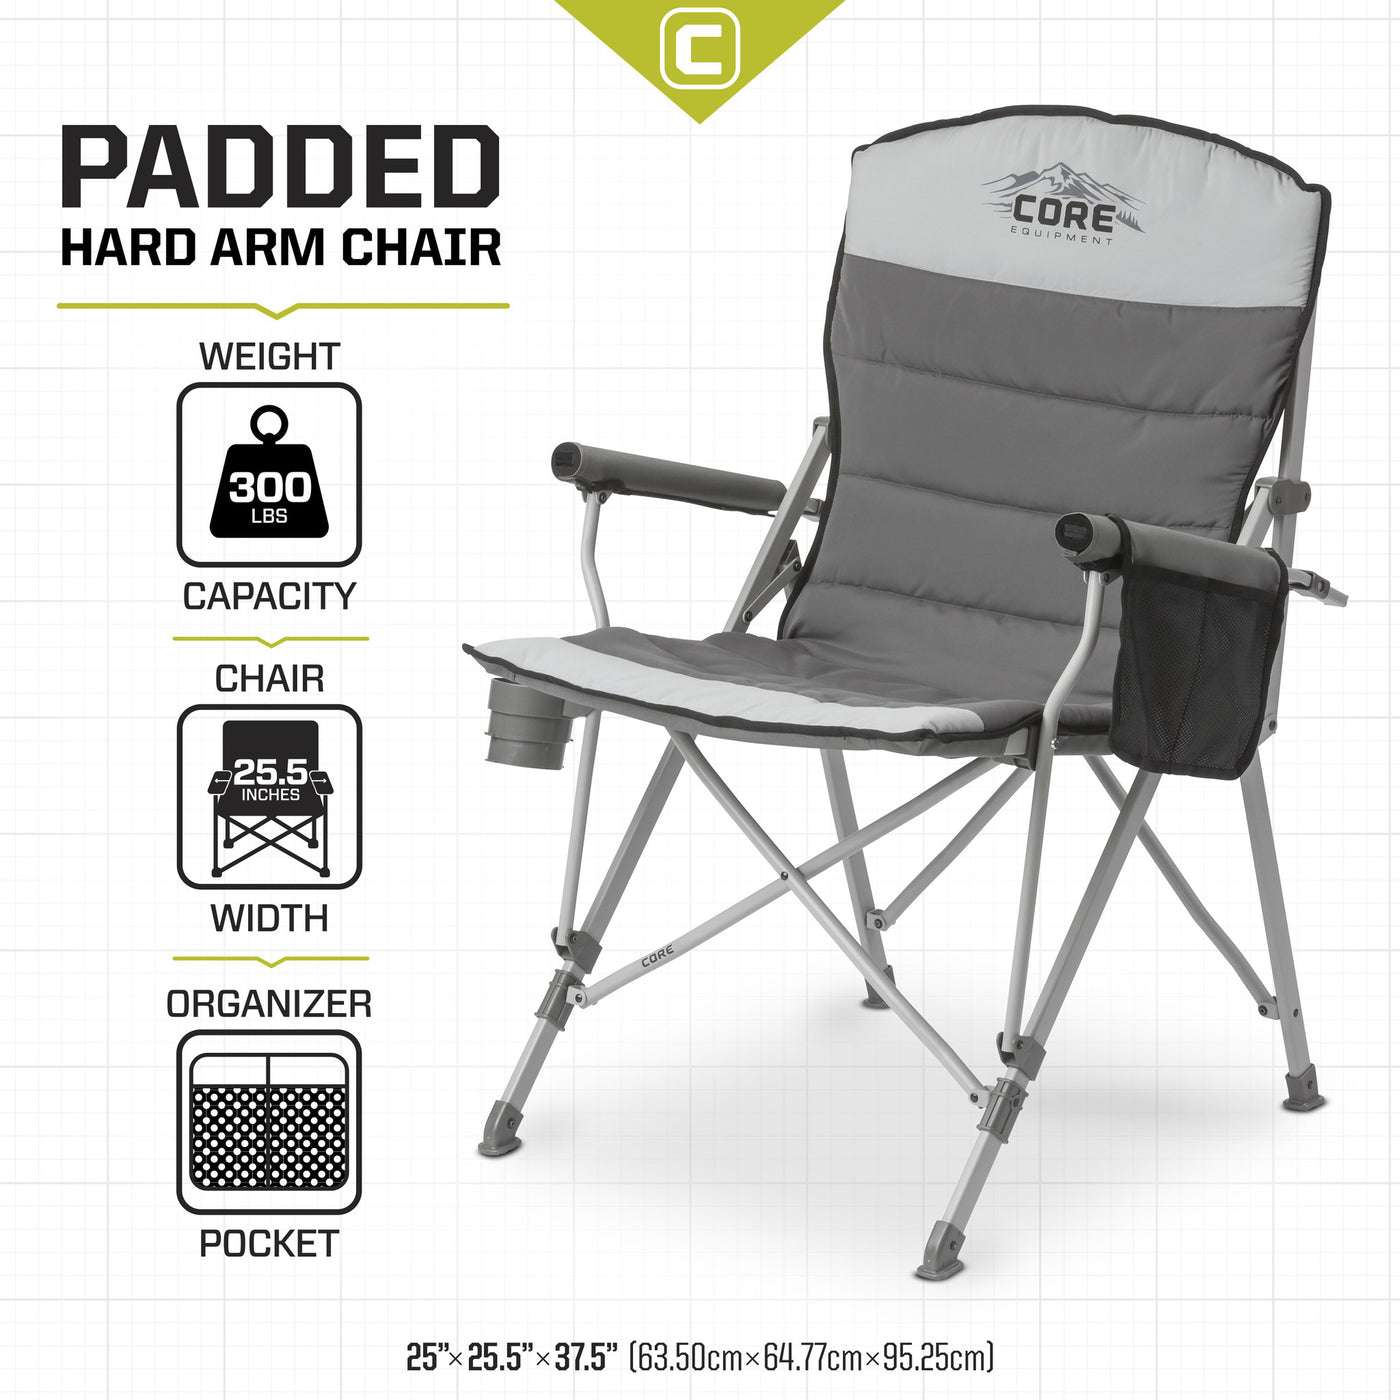 CORE Padded Hard Arm Chair specs